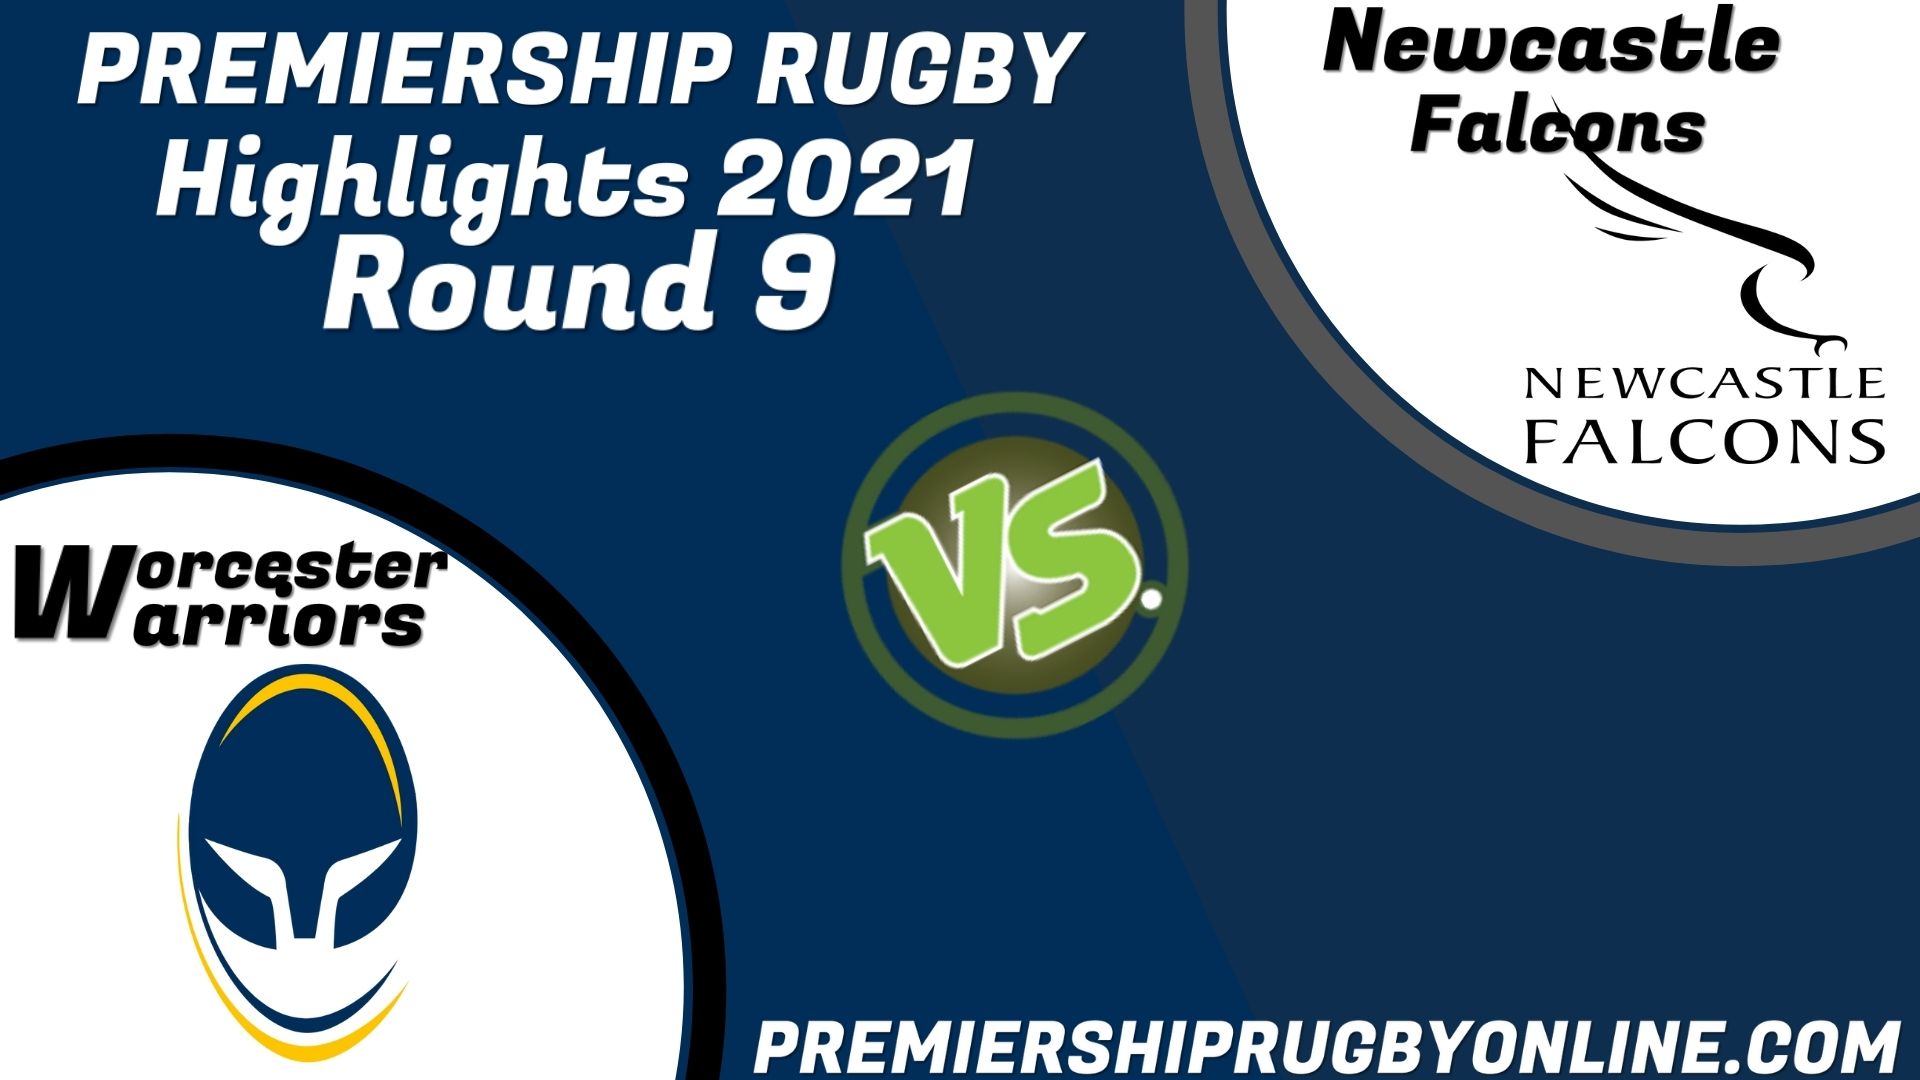 Newcastle Falcons Vs Worcester Warriors Highlights 2021 RD 9